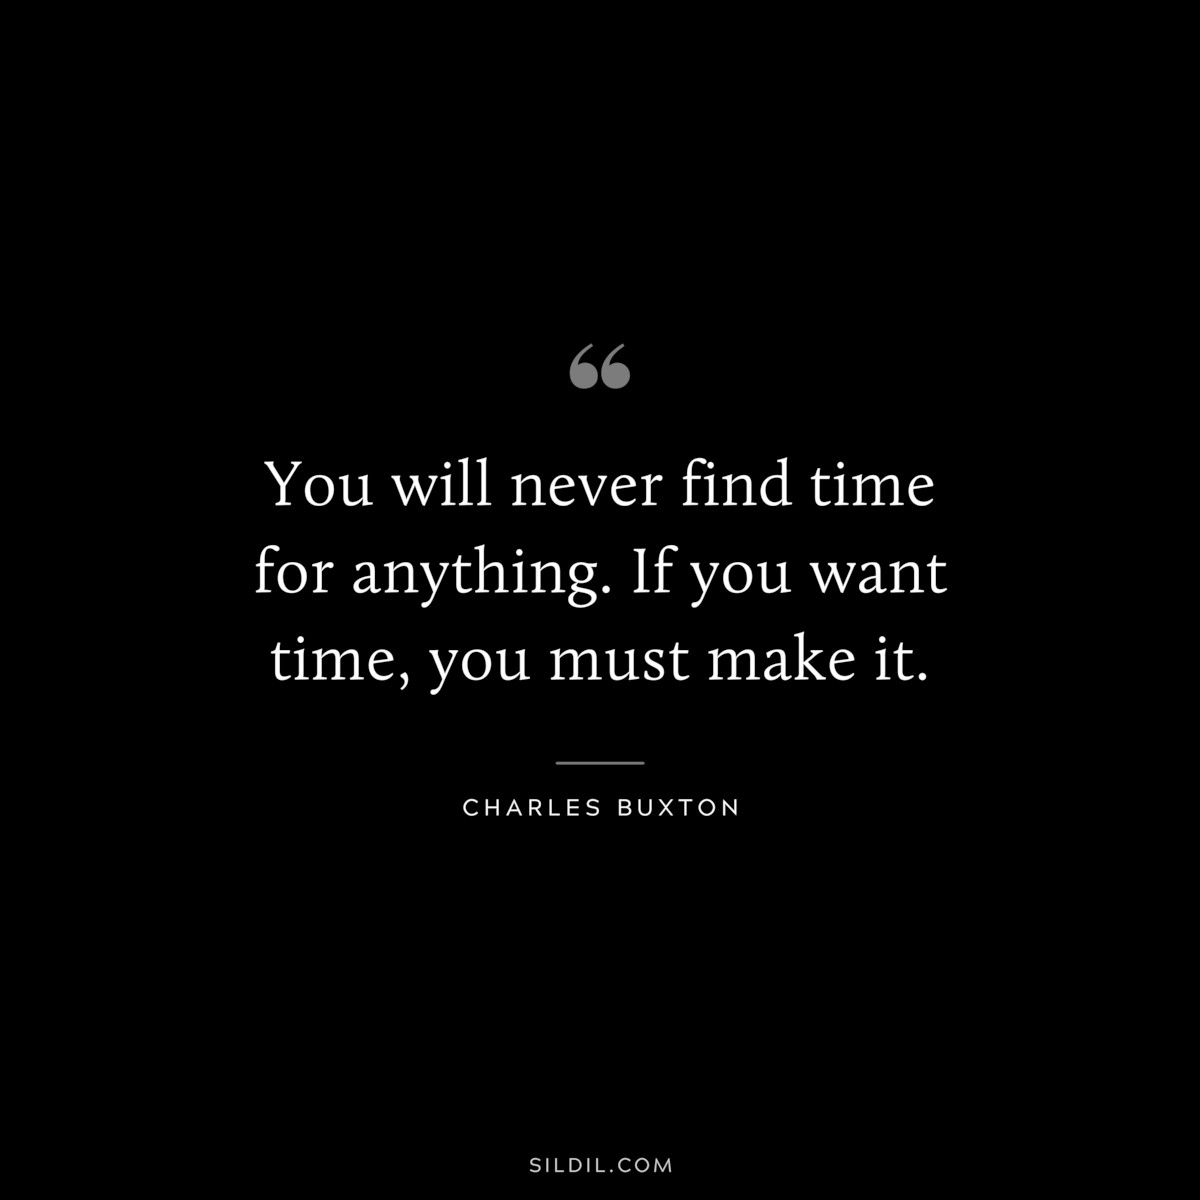 You will never find time for anything. If you want time, you must make it. ― Charles Buxton